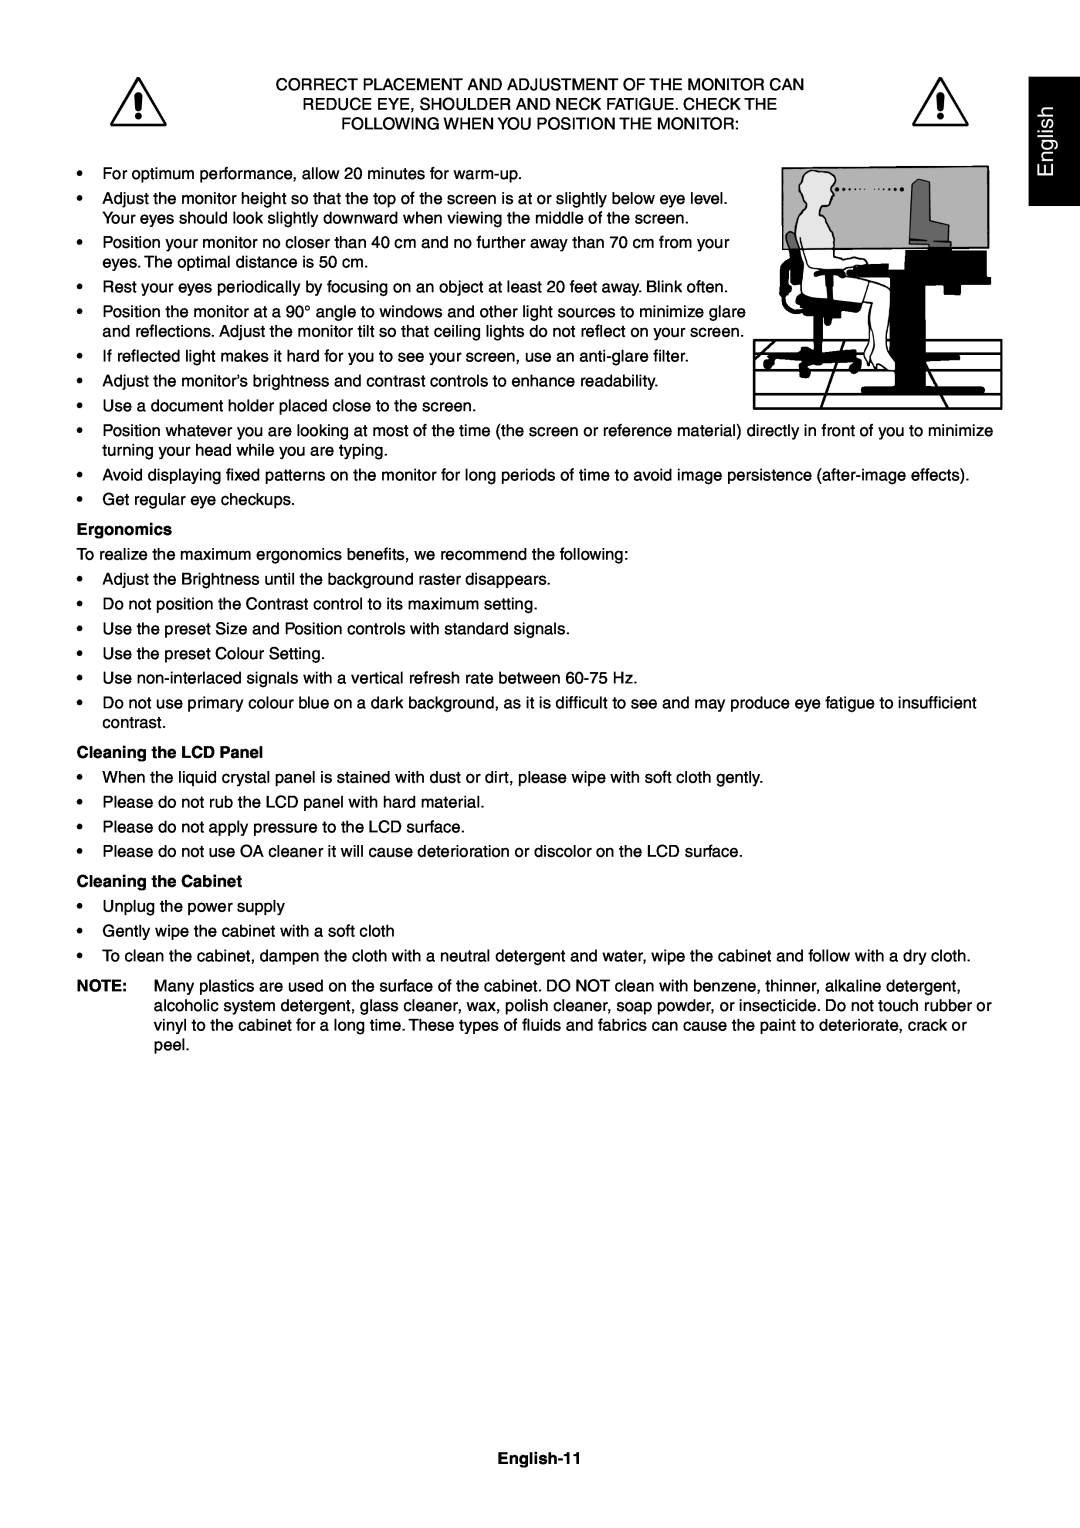 NEC LCD1970VX, LCD1970NX user manual Ergonomics, Cleaning the LCD Panel, Cleaning the Cabinet, English-11 